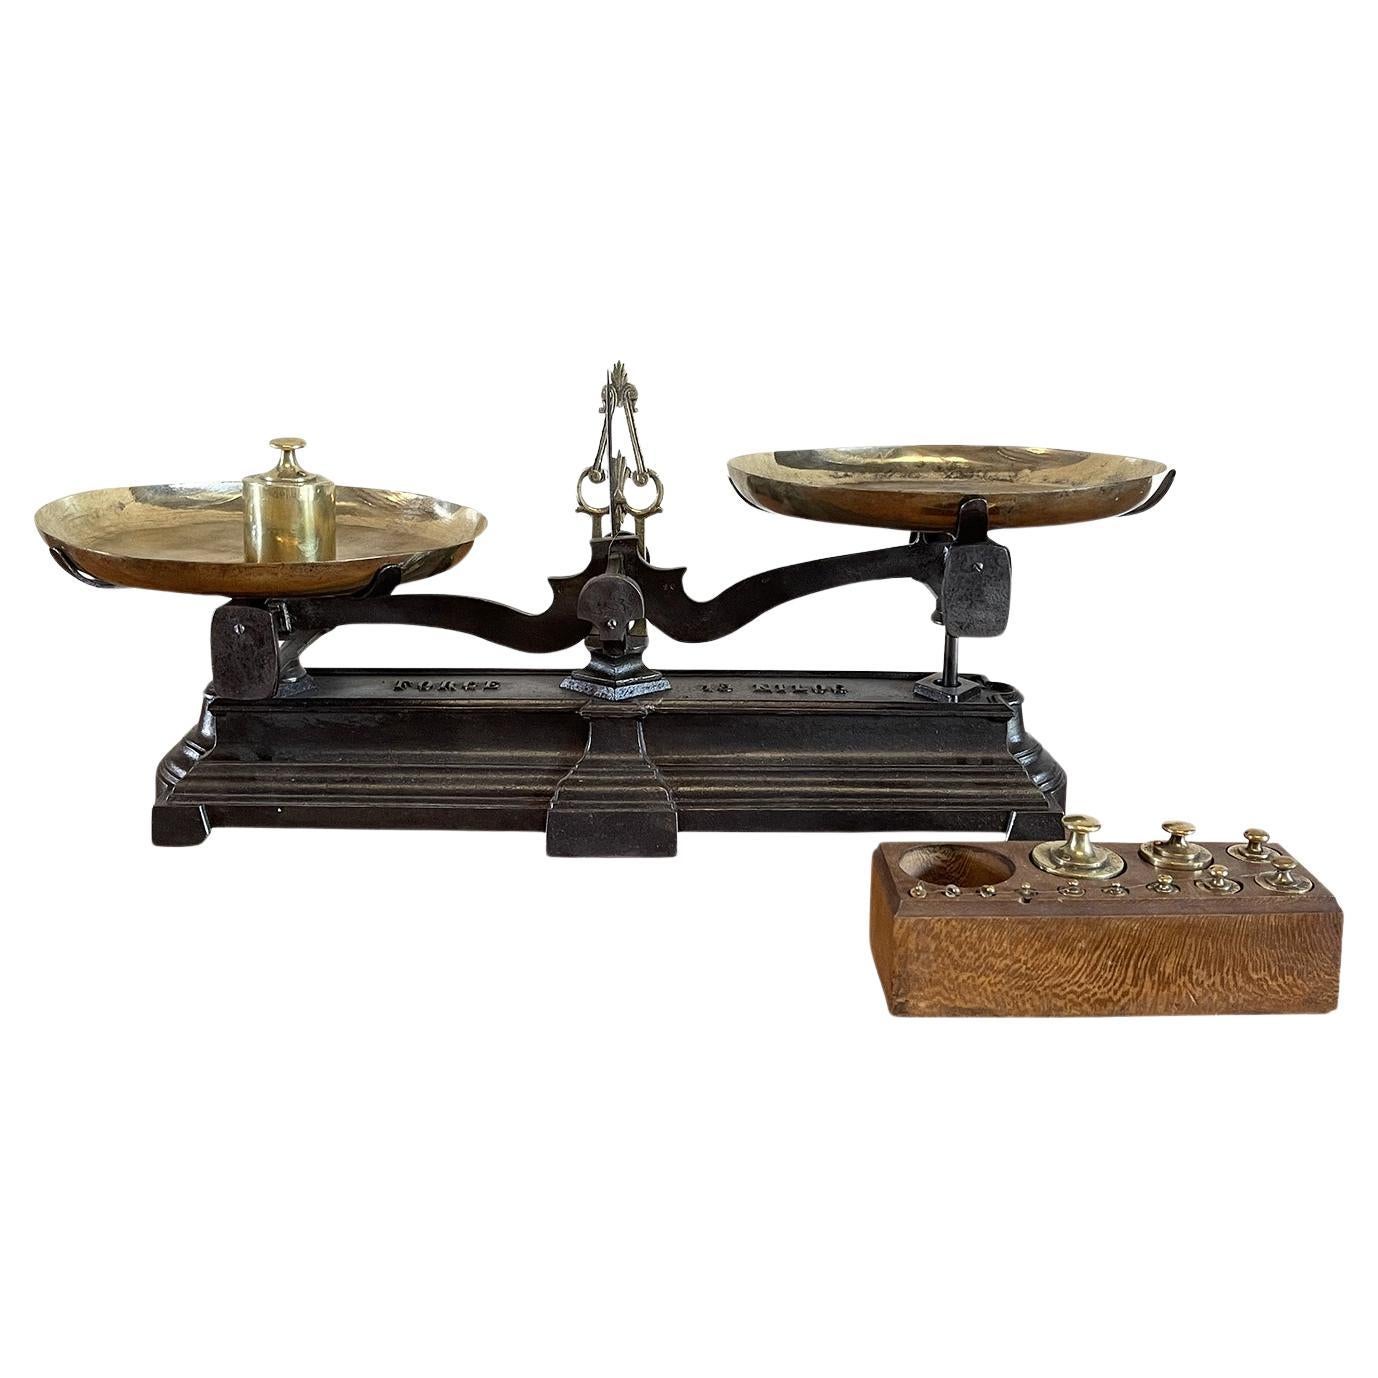 19th Century French Iron Balance - Antique Brass Scale For Sale